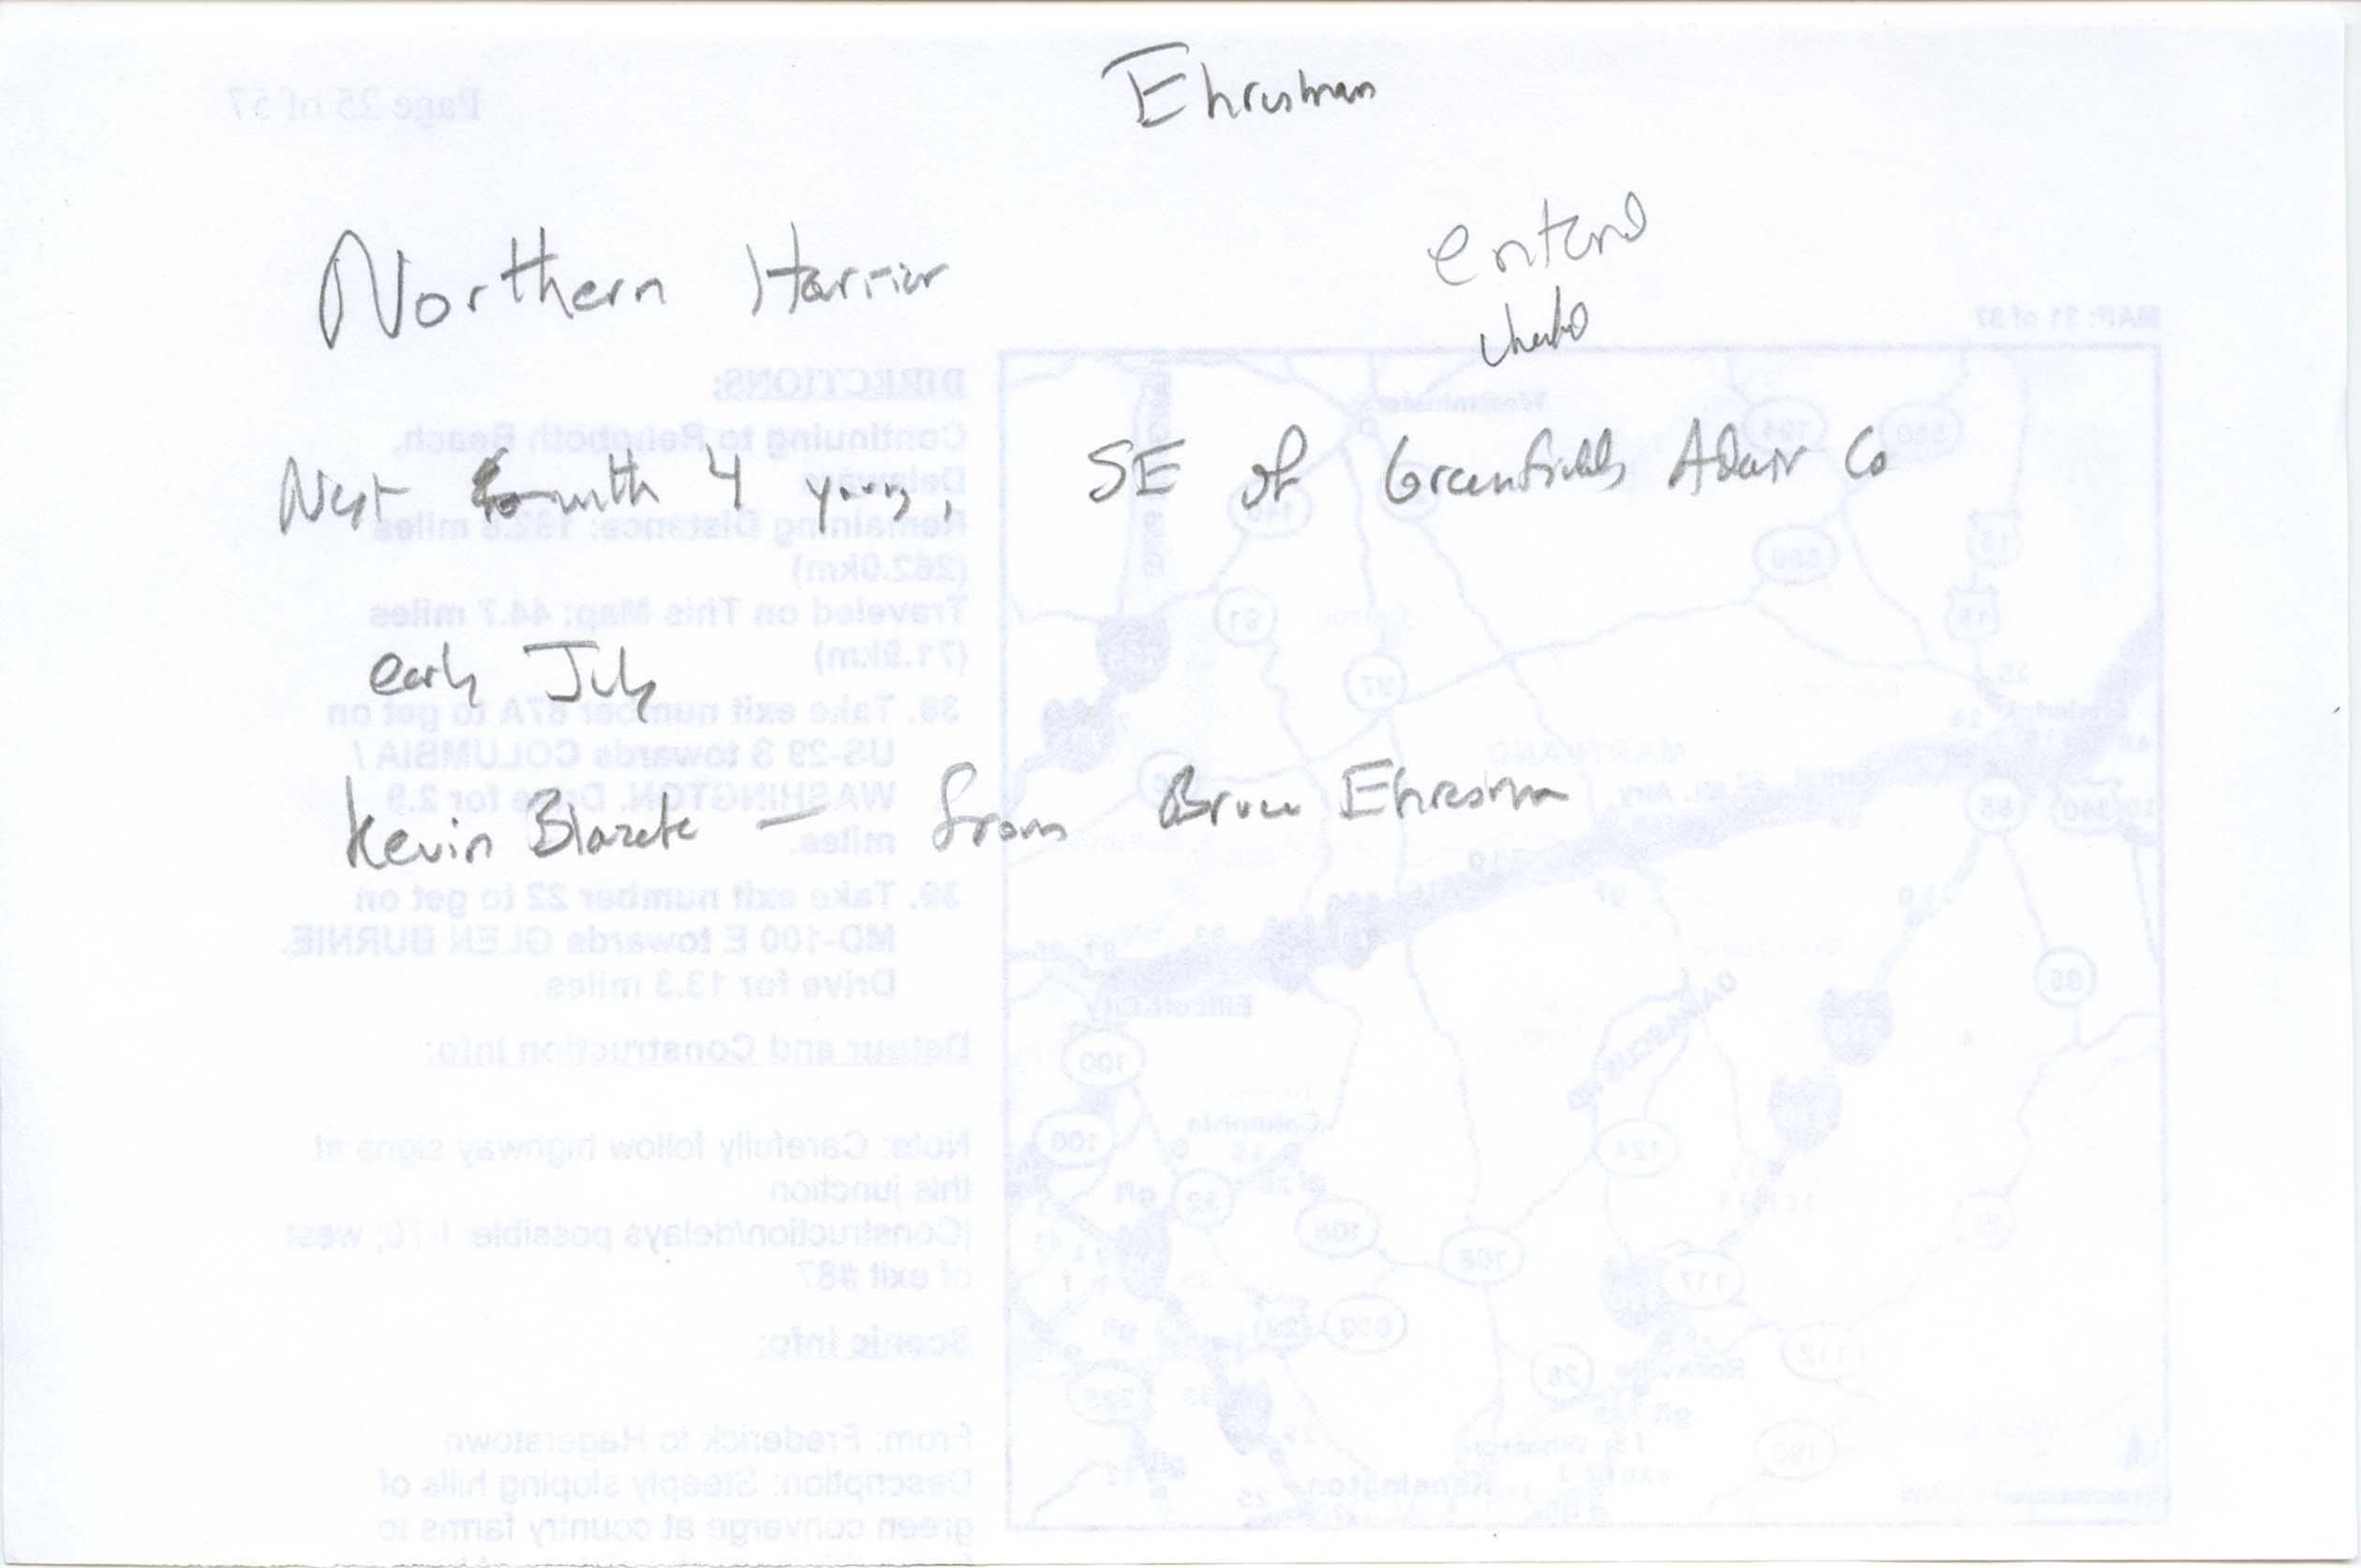 Field note about a Northern Harrier sighting contributed by Bruce Ehresman and Kevin Blazek, summer 2005